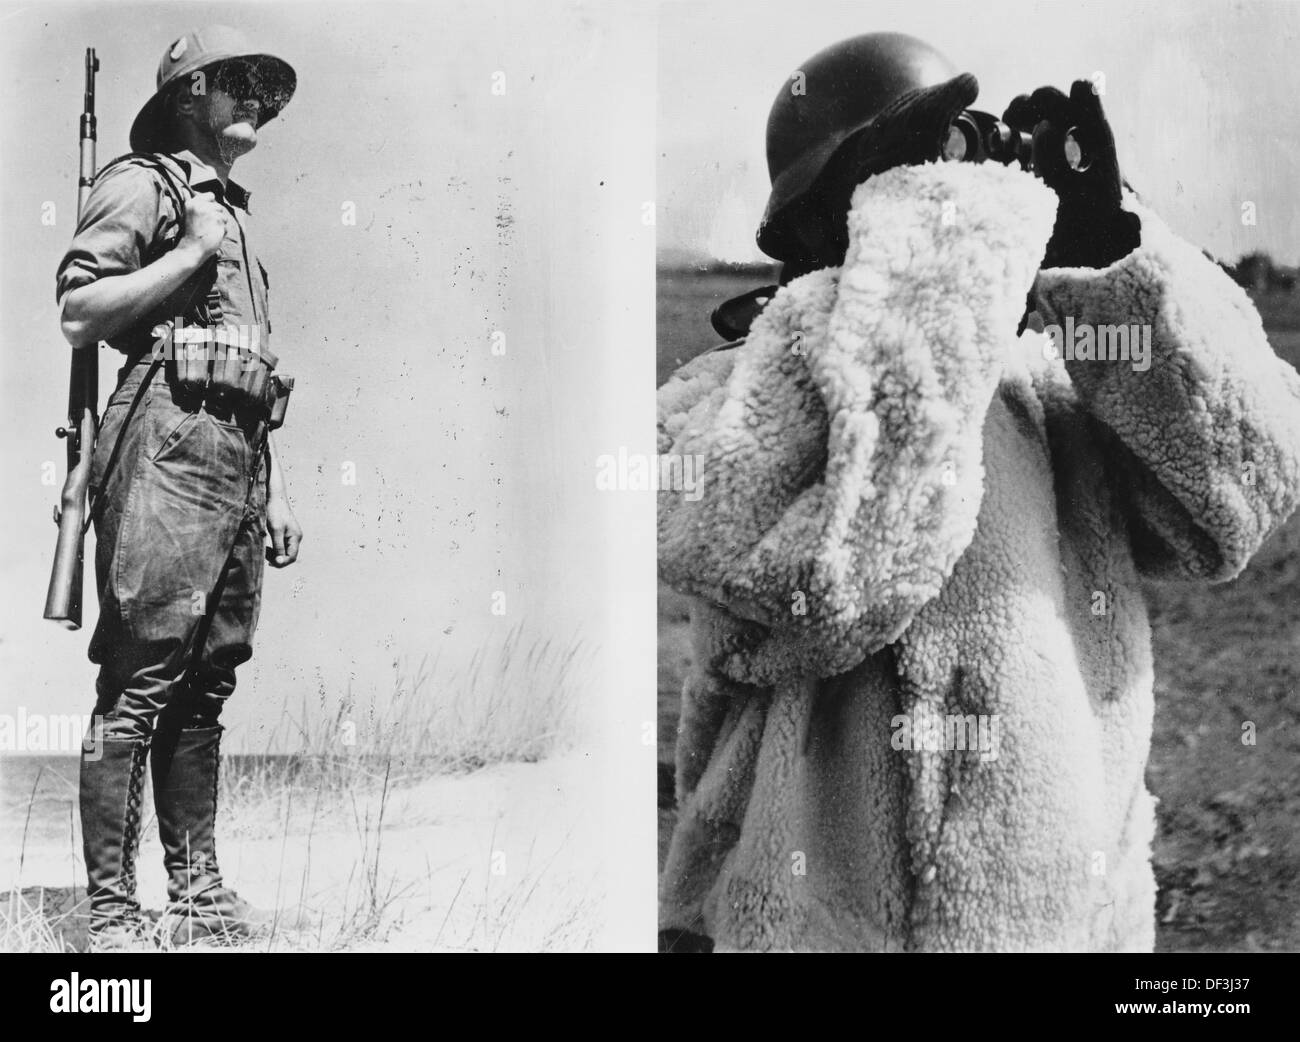 Contrasting of two soldier's images: on the left, a soldier of the German Africa Corps in Africa, and on the right, a soldier of the German Wehmacht on the Eastern Front in Russia, published 28 February 1942. Place unknown. The Nazi Propaganda! on the back of the image reads: " Always ready. Be it under the hot African sun or the frosty winds of the long Eastern Front - our soldiers are always ready for fighting until the final victory. Our image on the left shows a soldier of the German Africa Corps as a post in front of an encampment of the German Africa soldiers. Attentively and excitedly,  Stock Photo